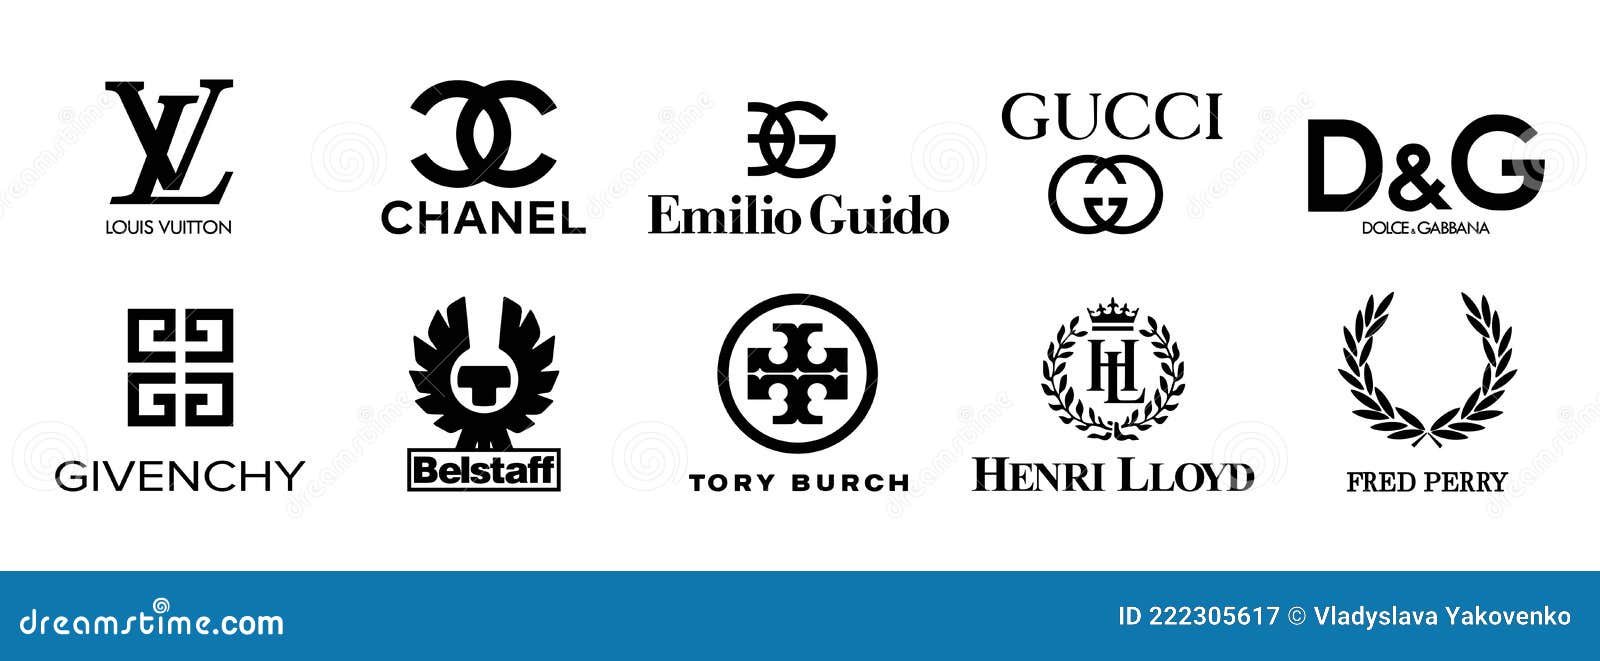 Chanel Logo Brand Gucci logo text trademark png  PNGEgg